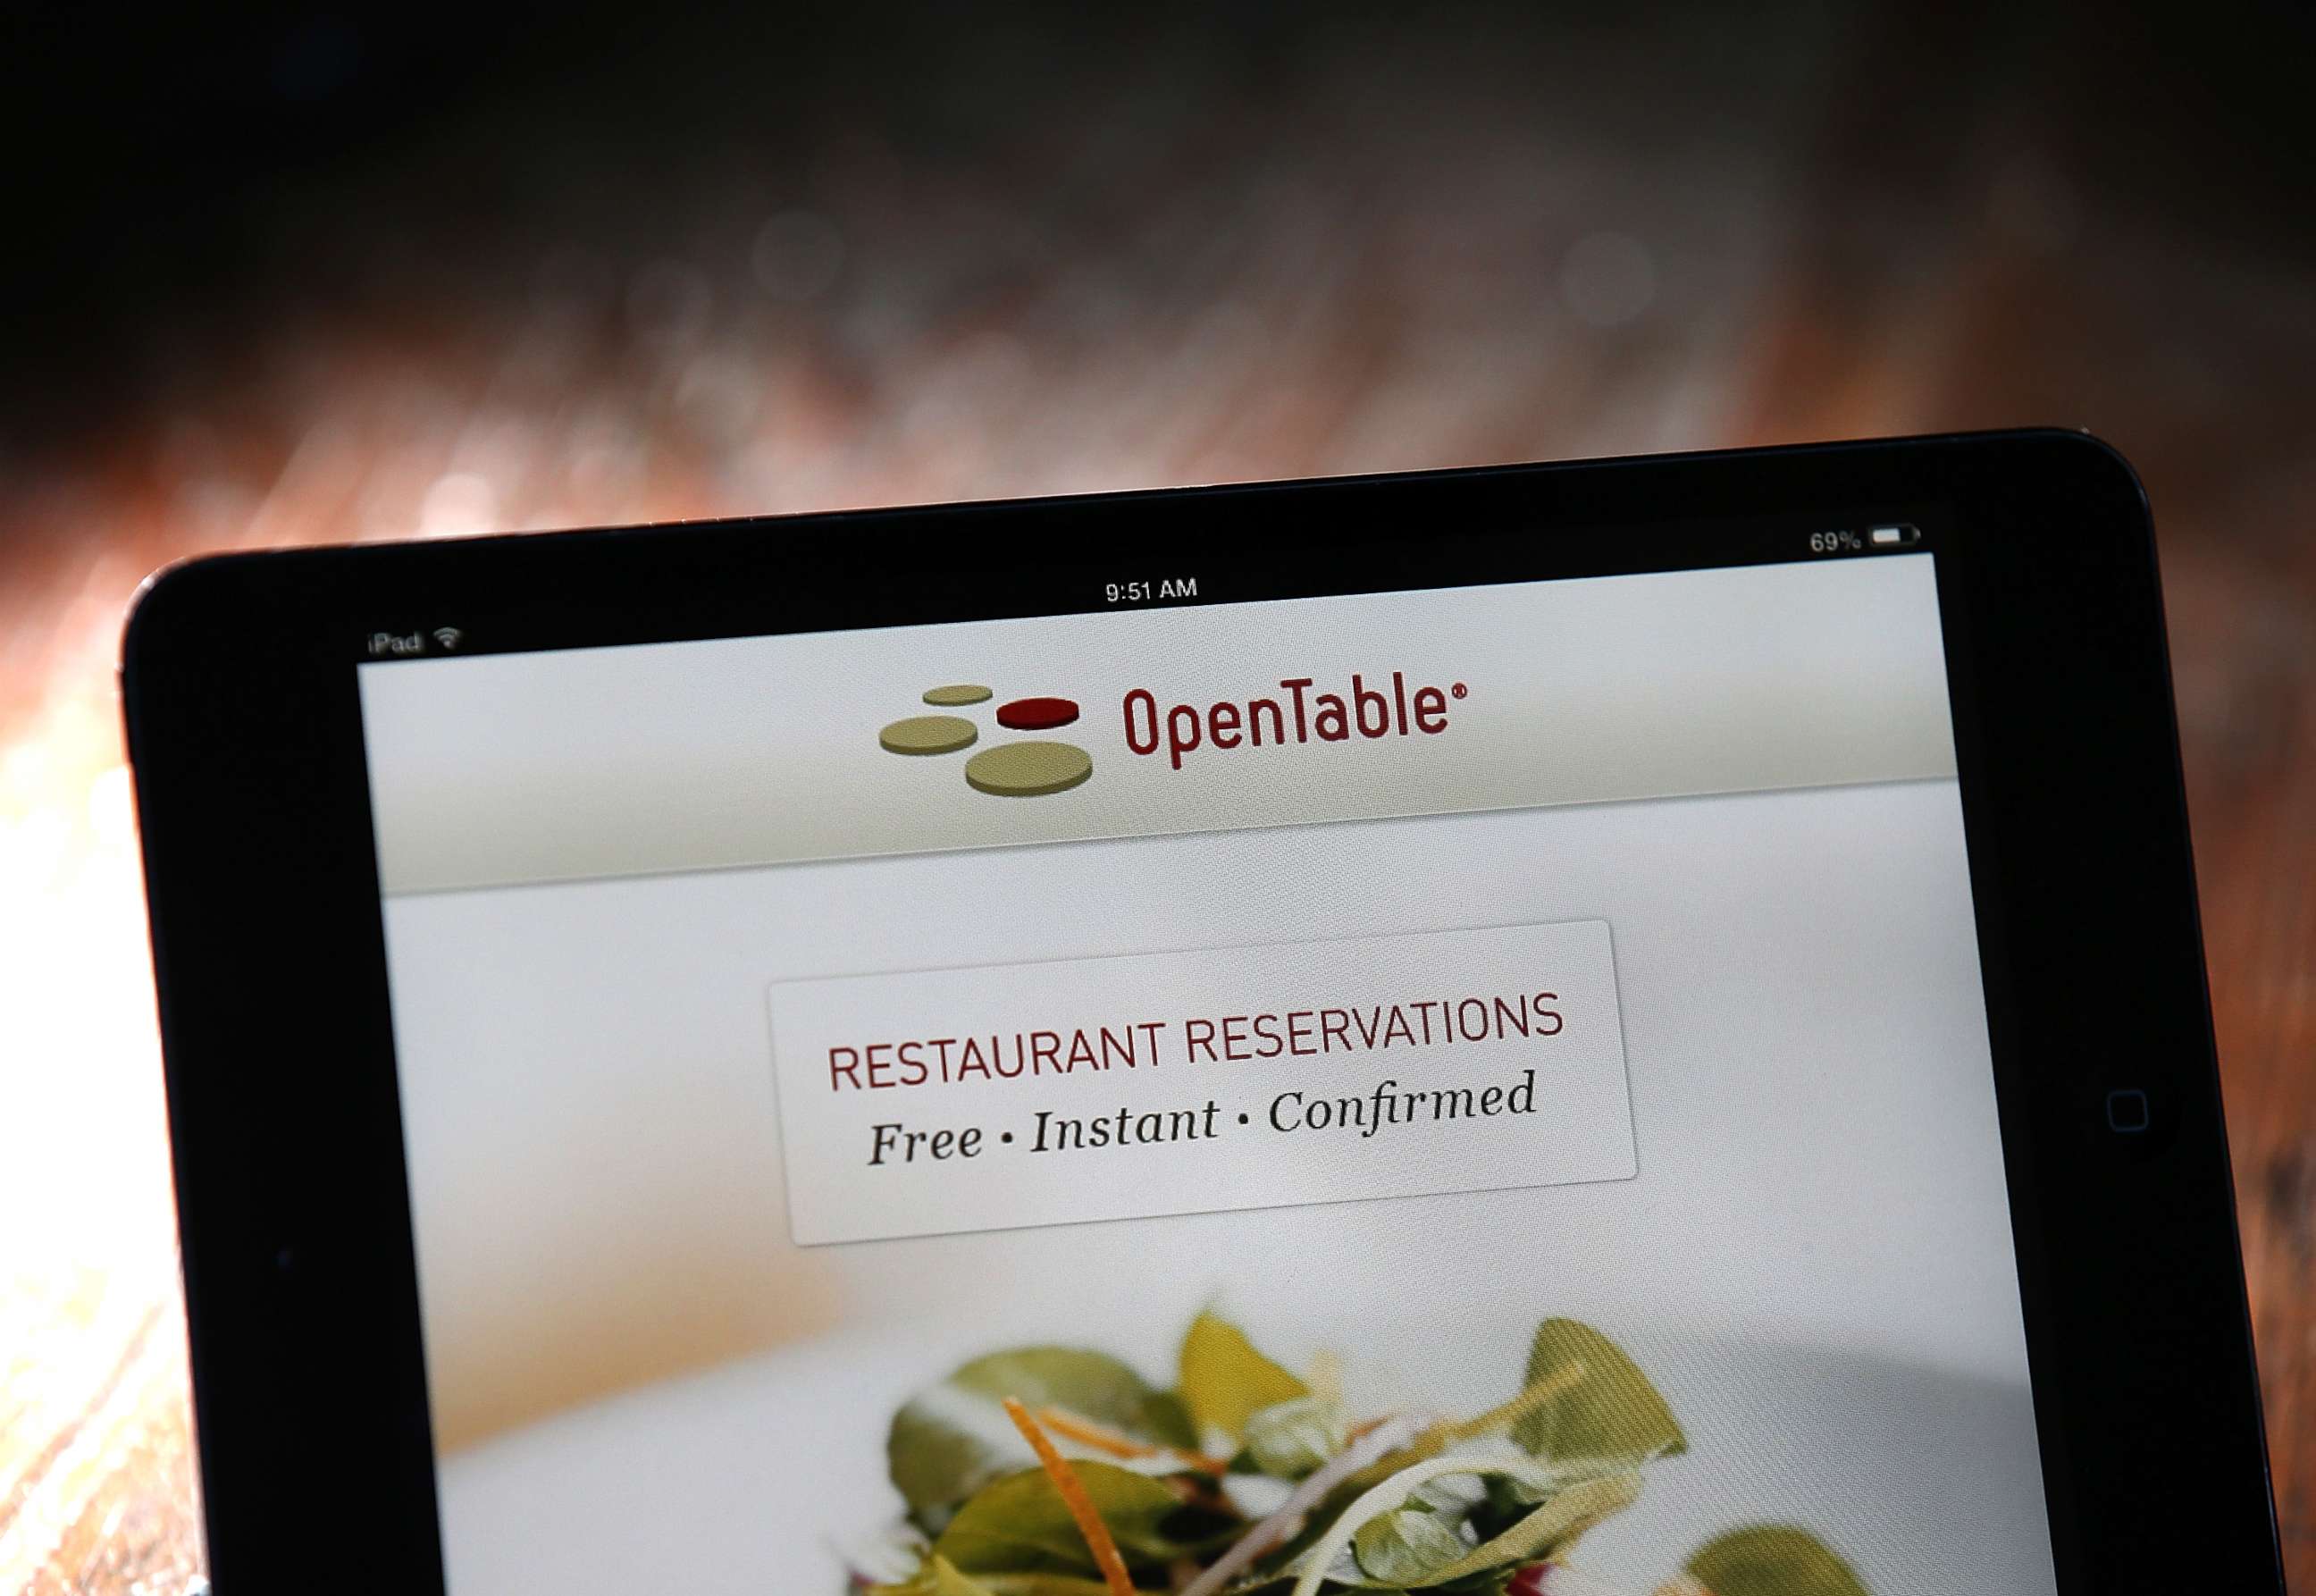 OpenTable Block –  Support